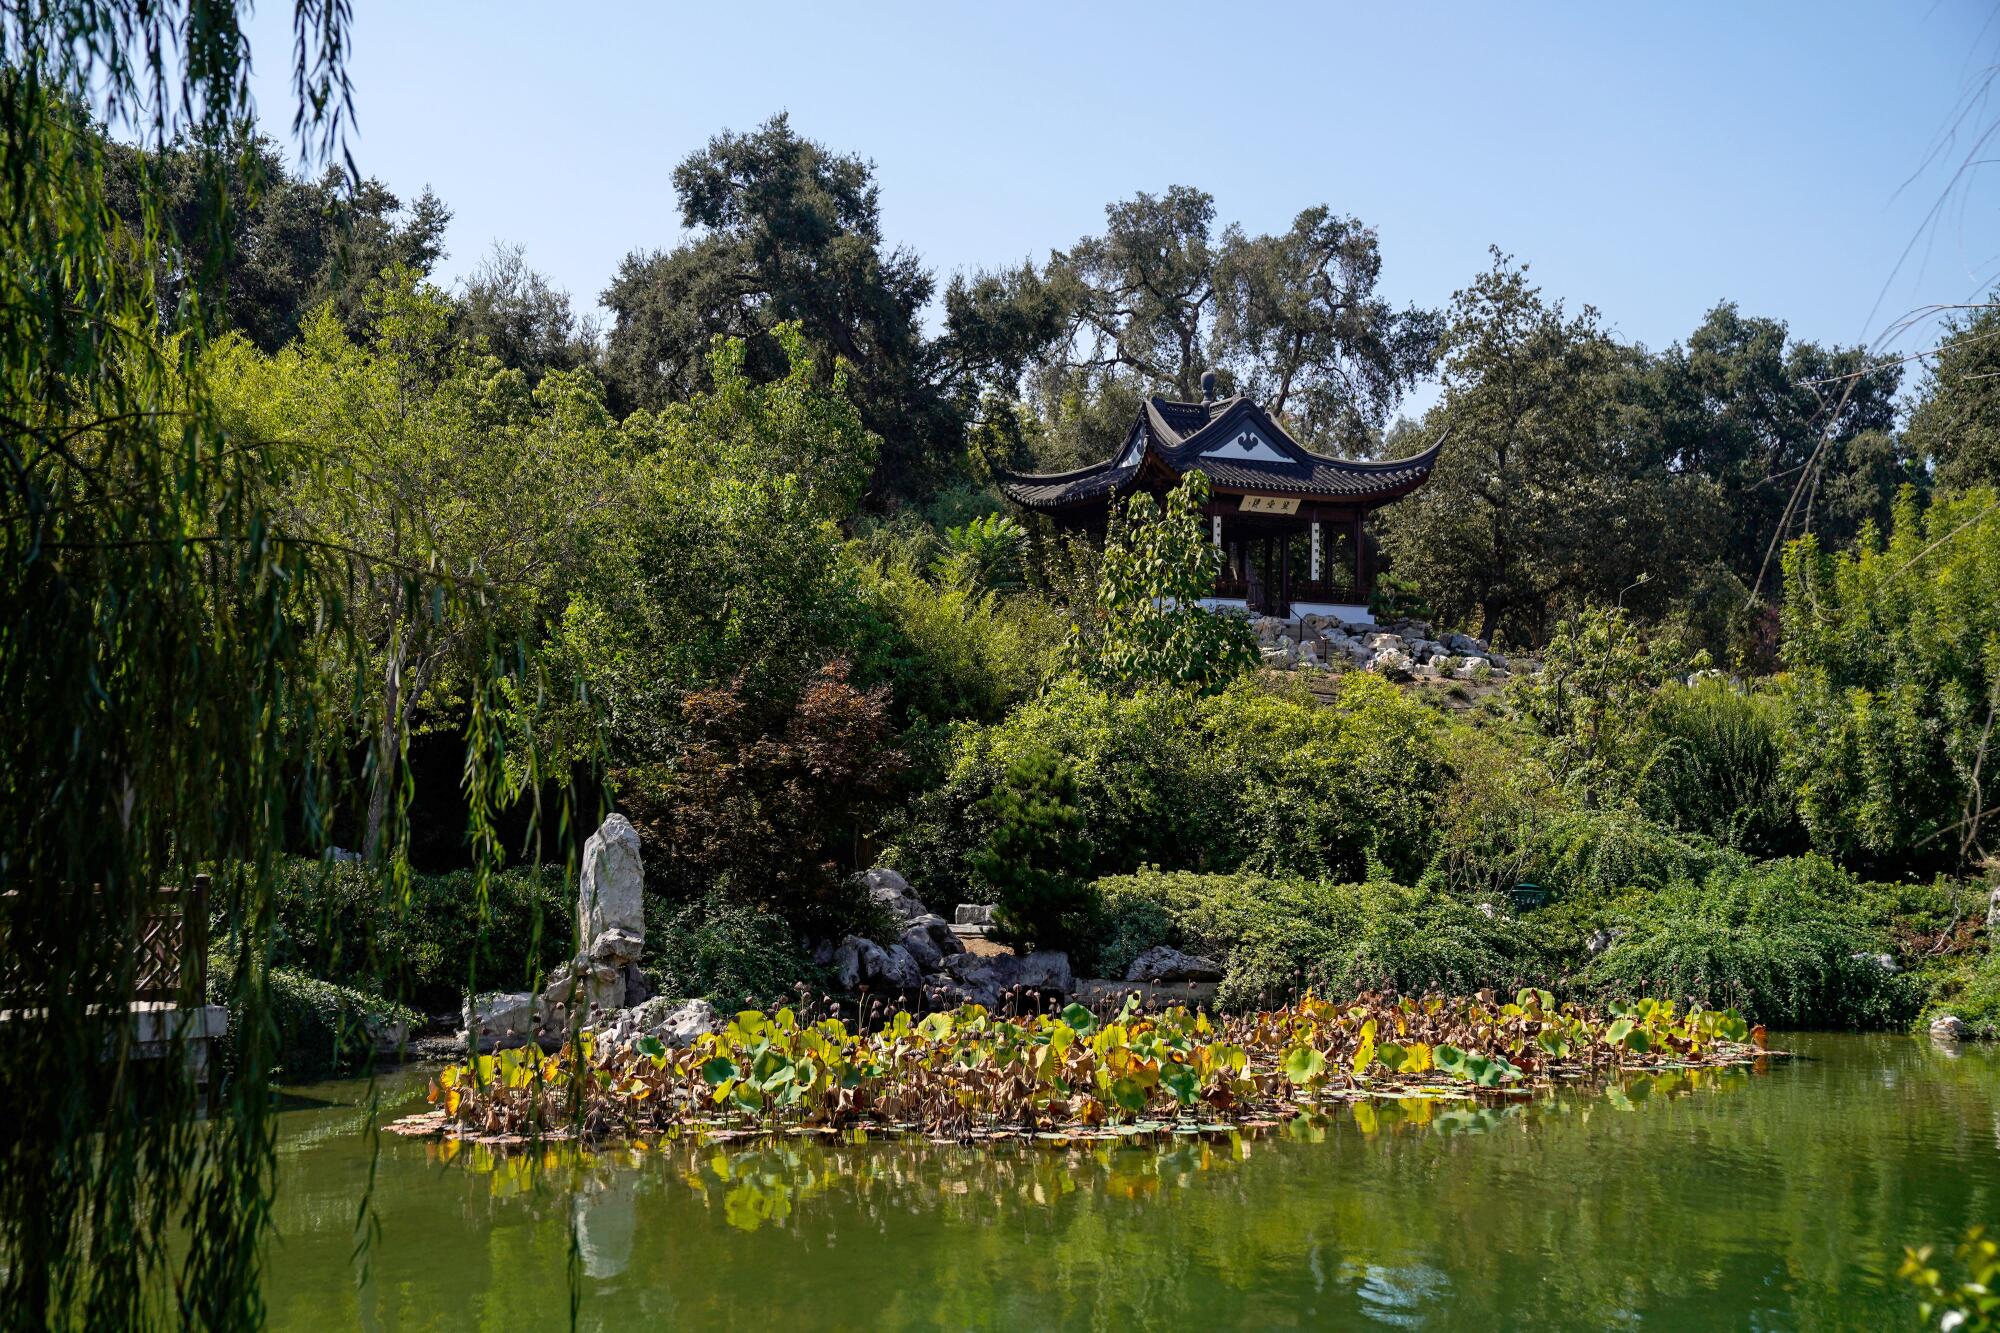 The Stargazing Tower in the new Chinese Garden at the Huntington Library, Art Museum, and Botanical Gardens.